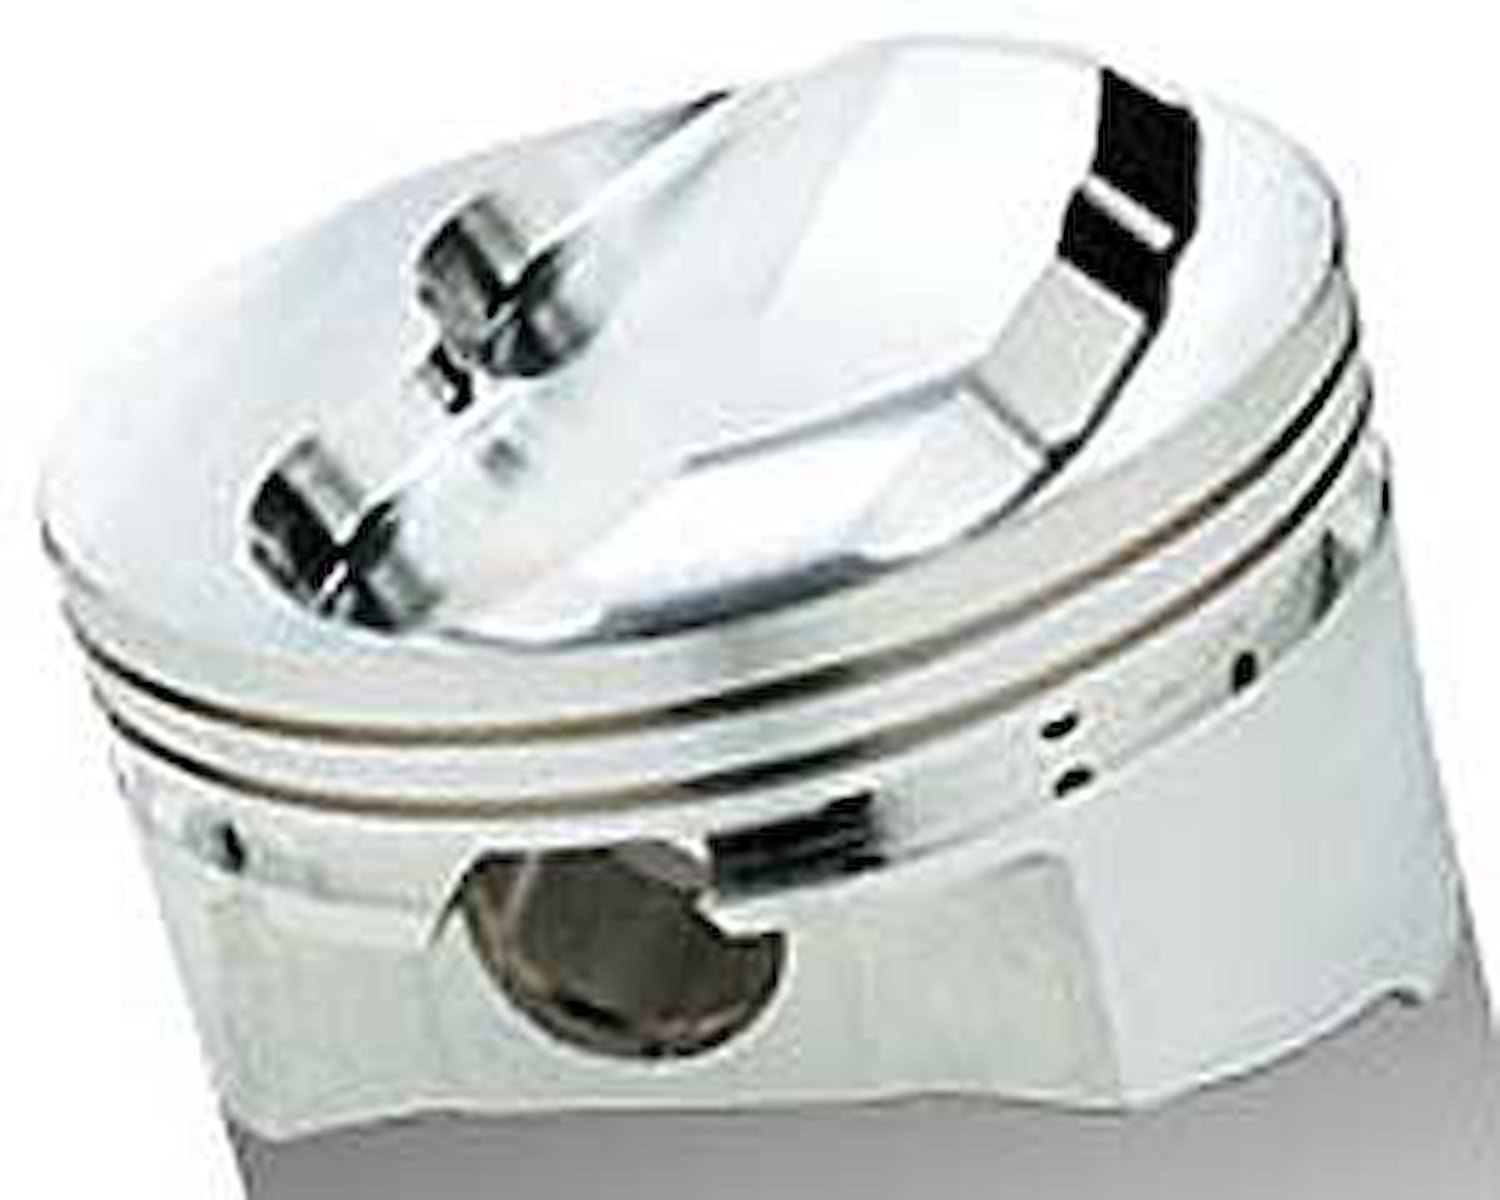 SRP Dome Pistons for Small Block Chevy Bore 400 4.155"